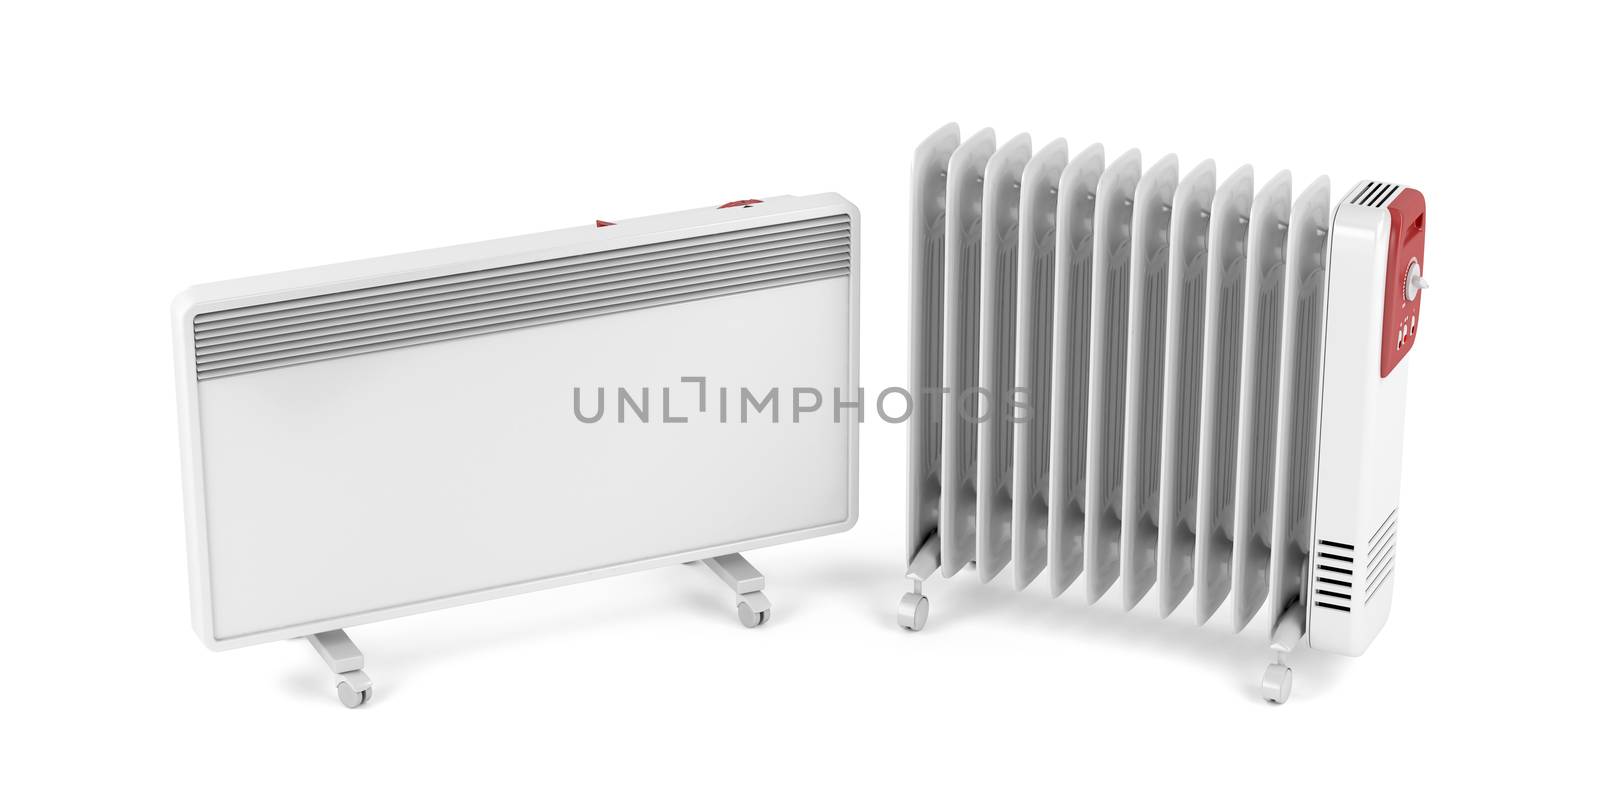 Convection and oil-filled heaters by magraphics